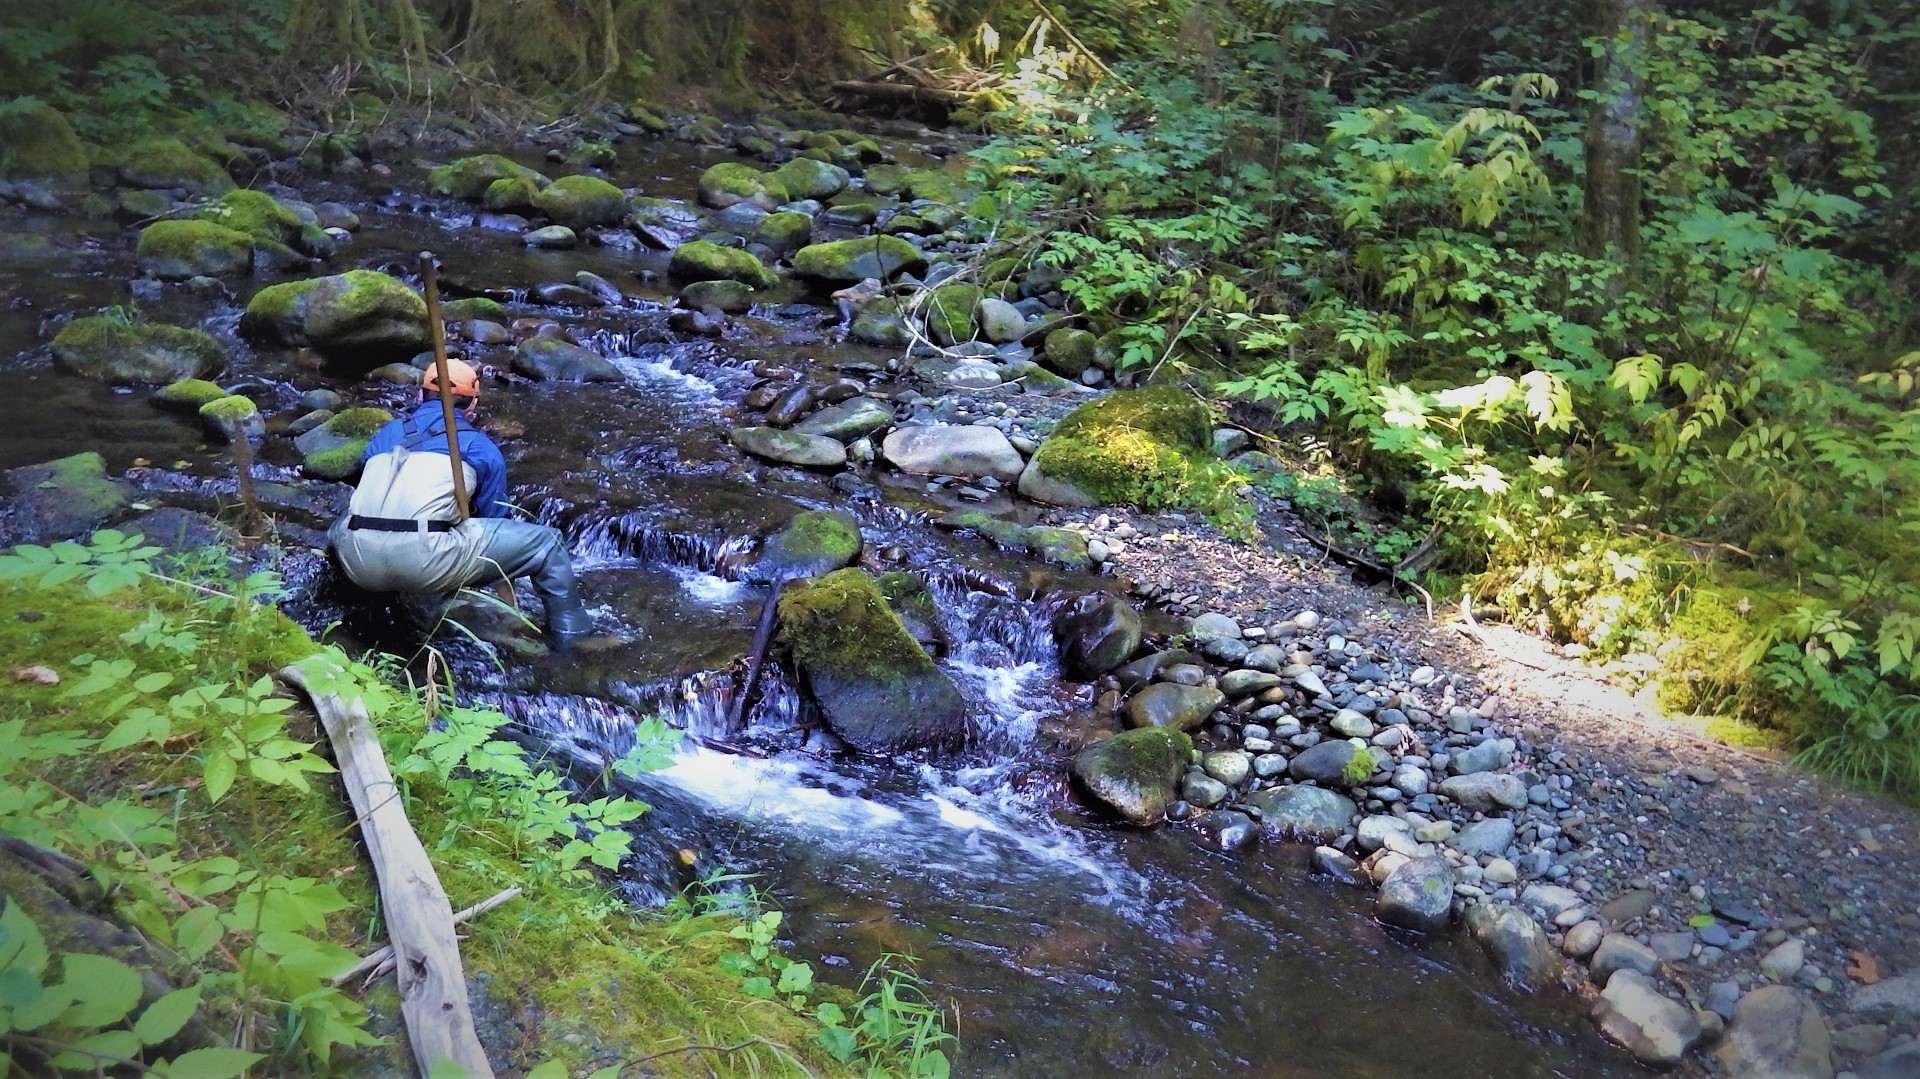 A crewmember holding a net in the stream